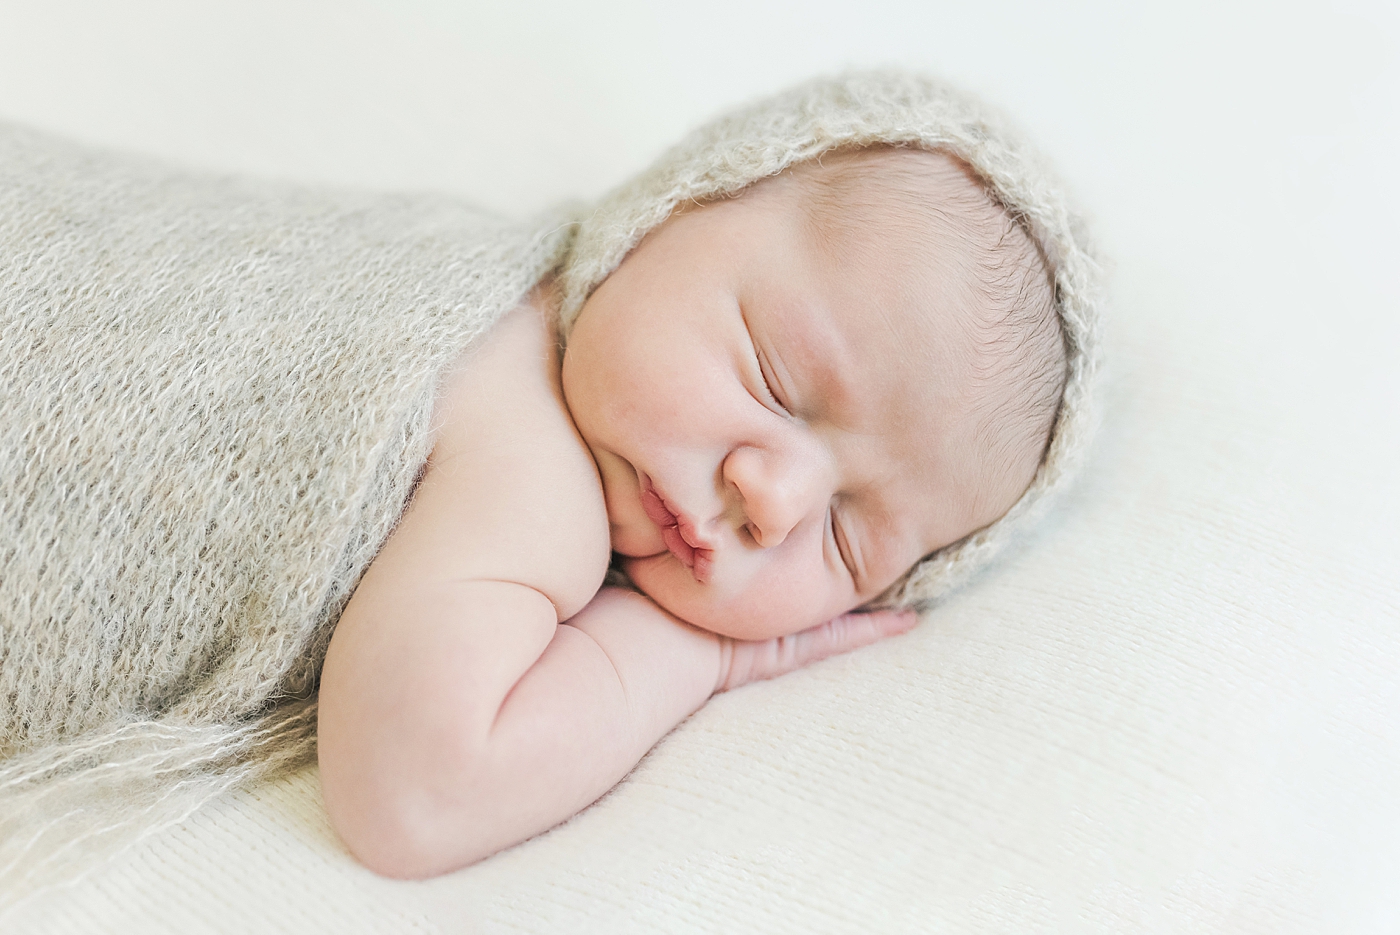 Sleeping newborn with bonnet and swaddle | Photo by Anna Wisjo Photography